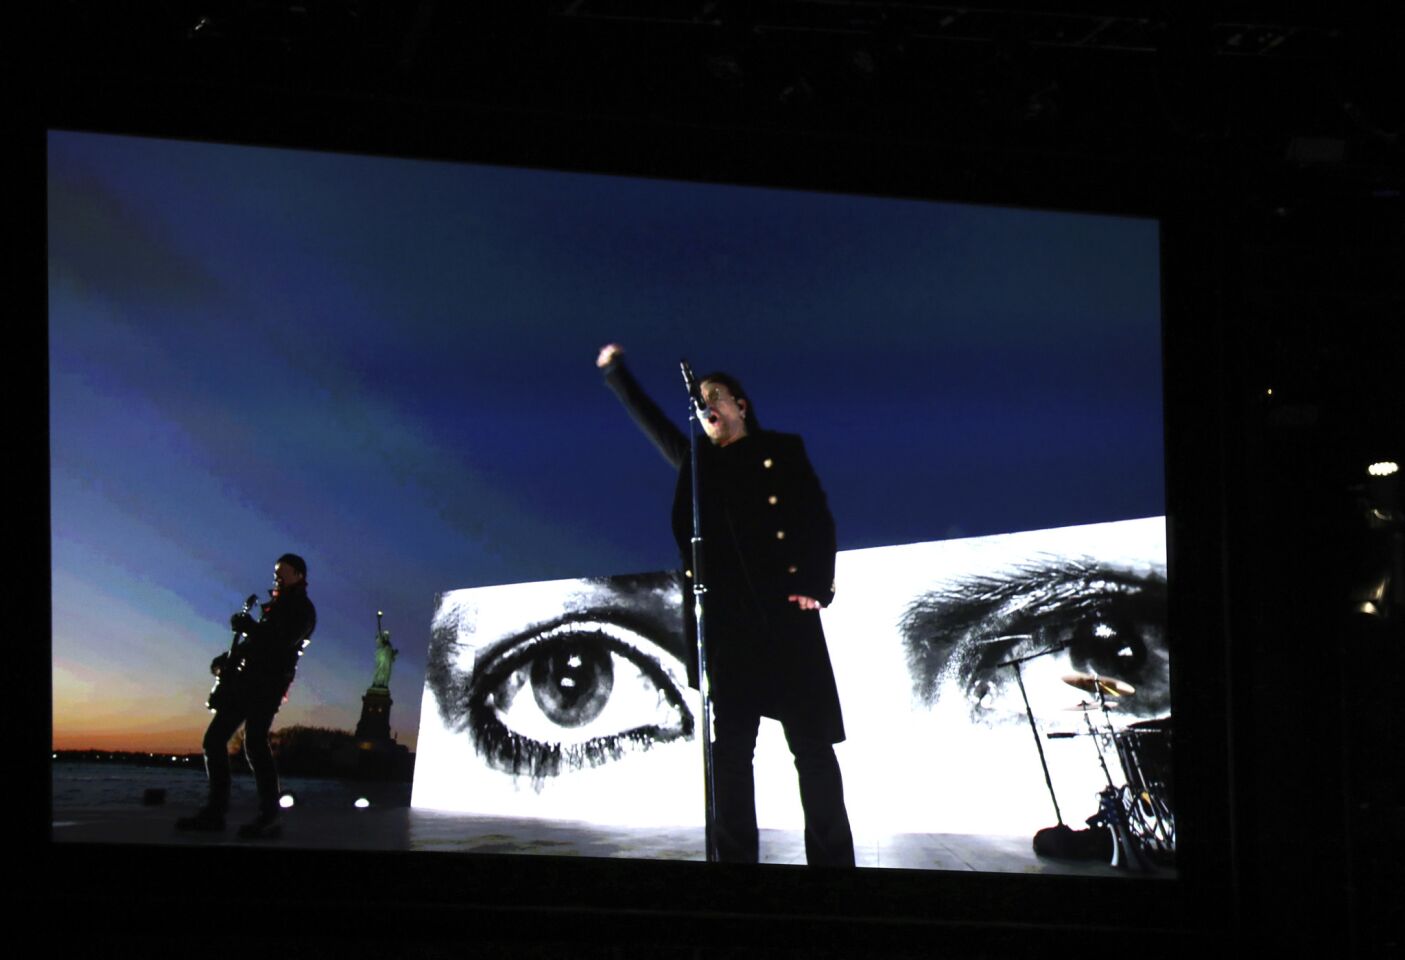 U2 appears via satellite as they perform "Get Out of Your Own Way" on the Hudson River.